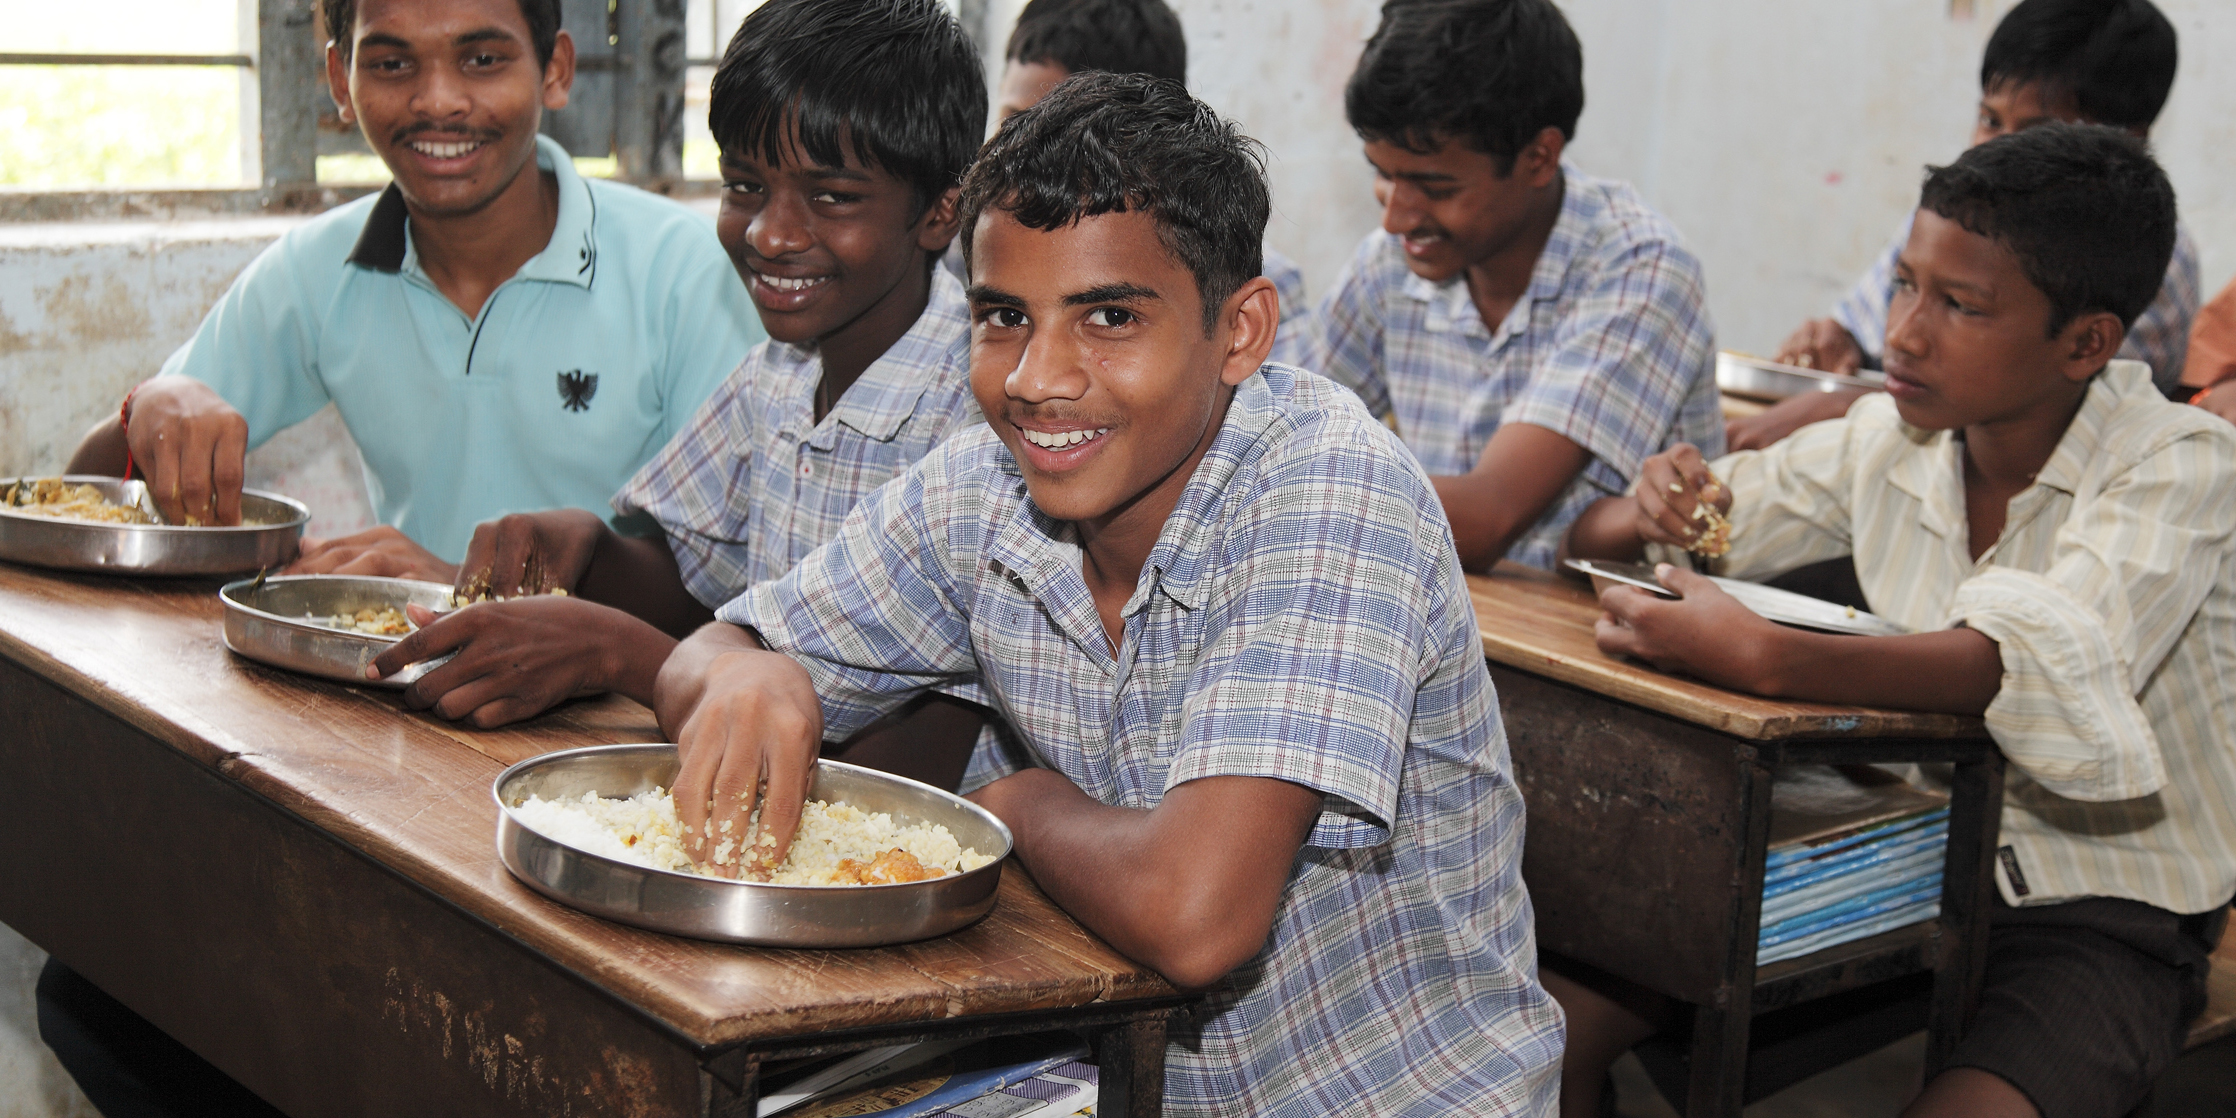 Teenage boys in India given better food than girls